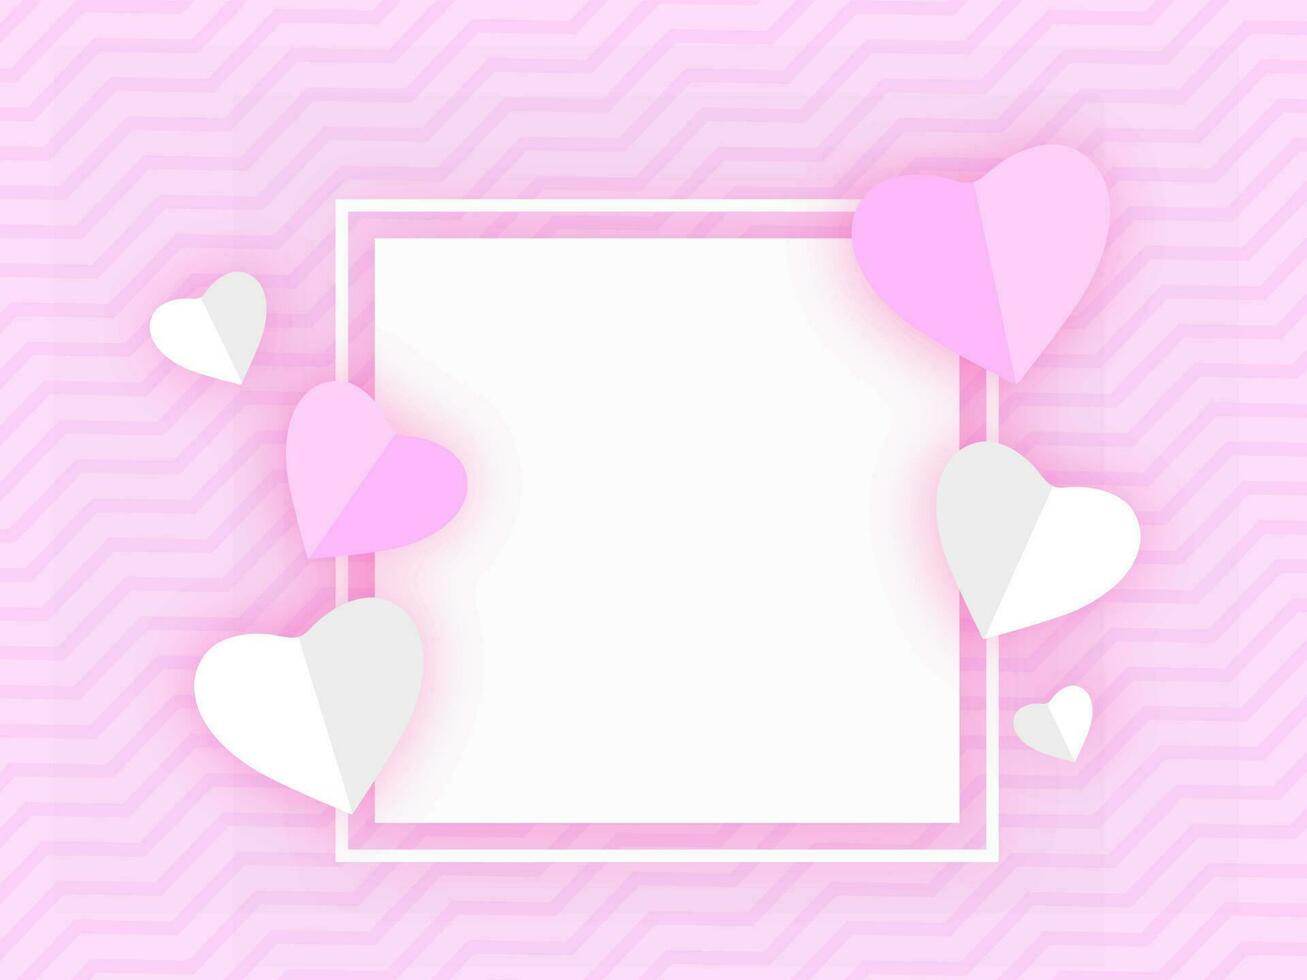 Paper Hearts Shape Decorated on Purple Wavy Striped Background with Space for your Message. vector